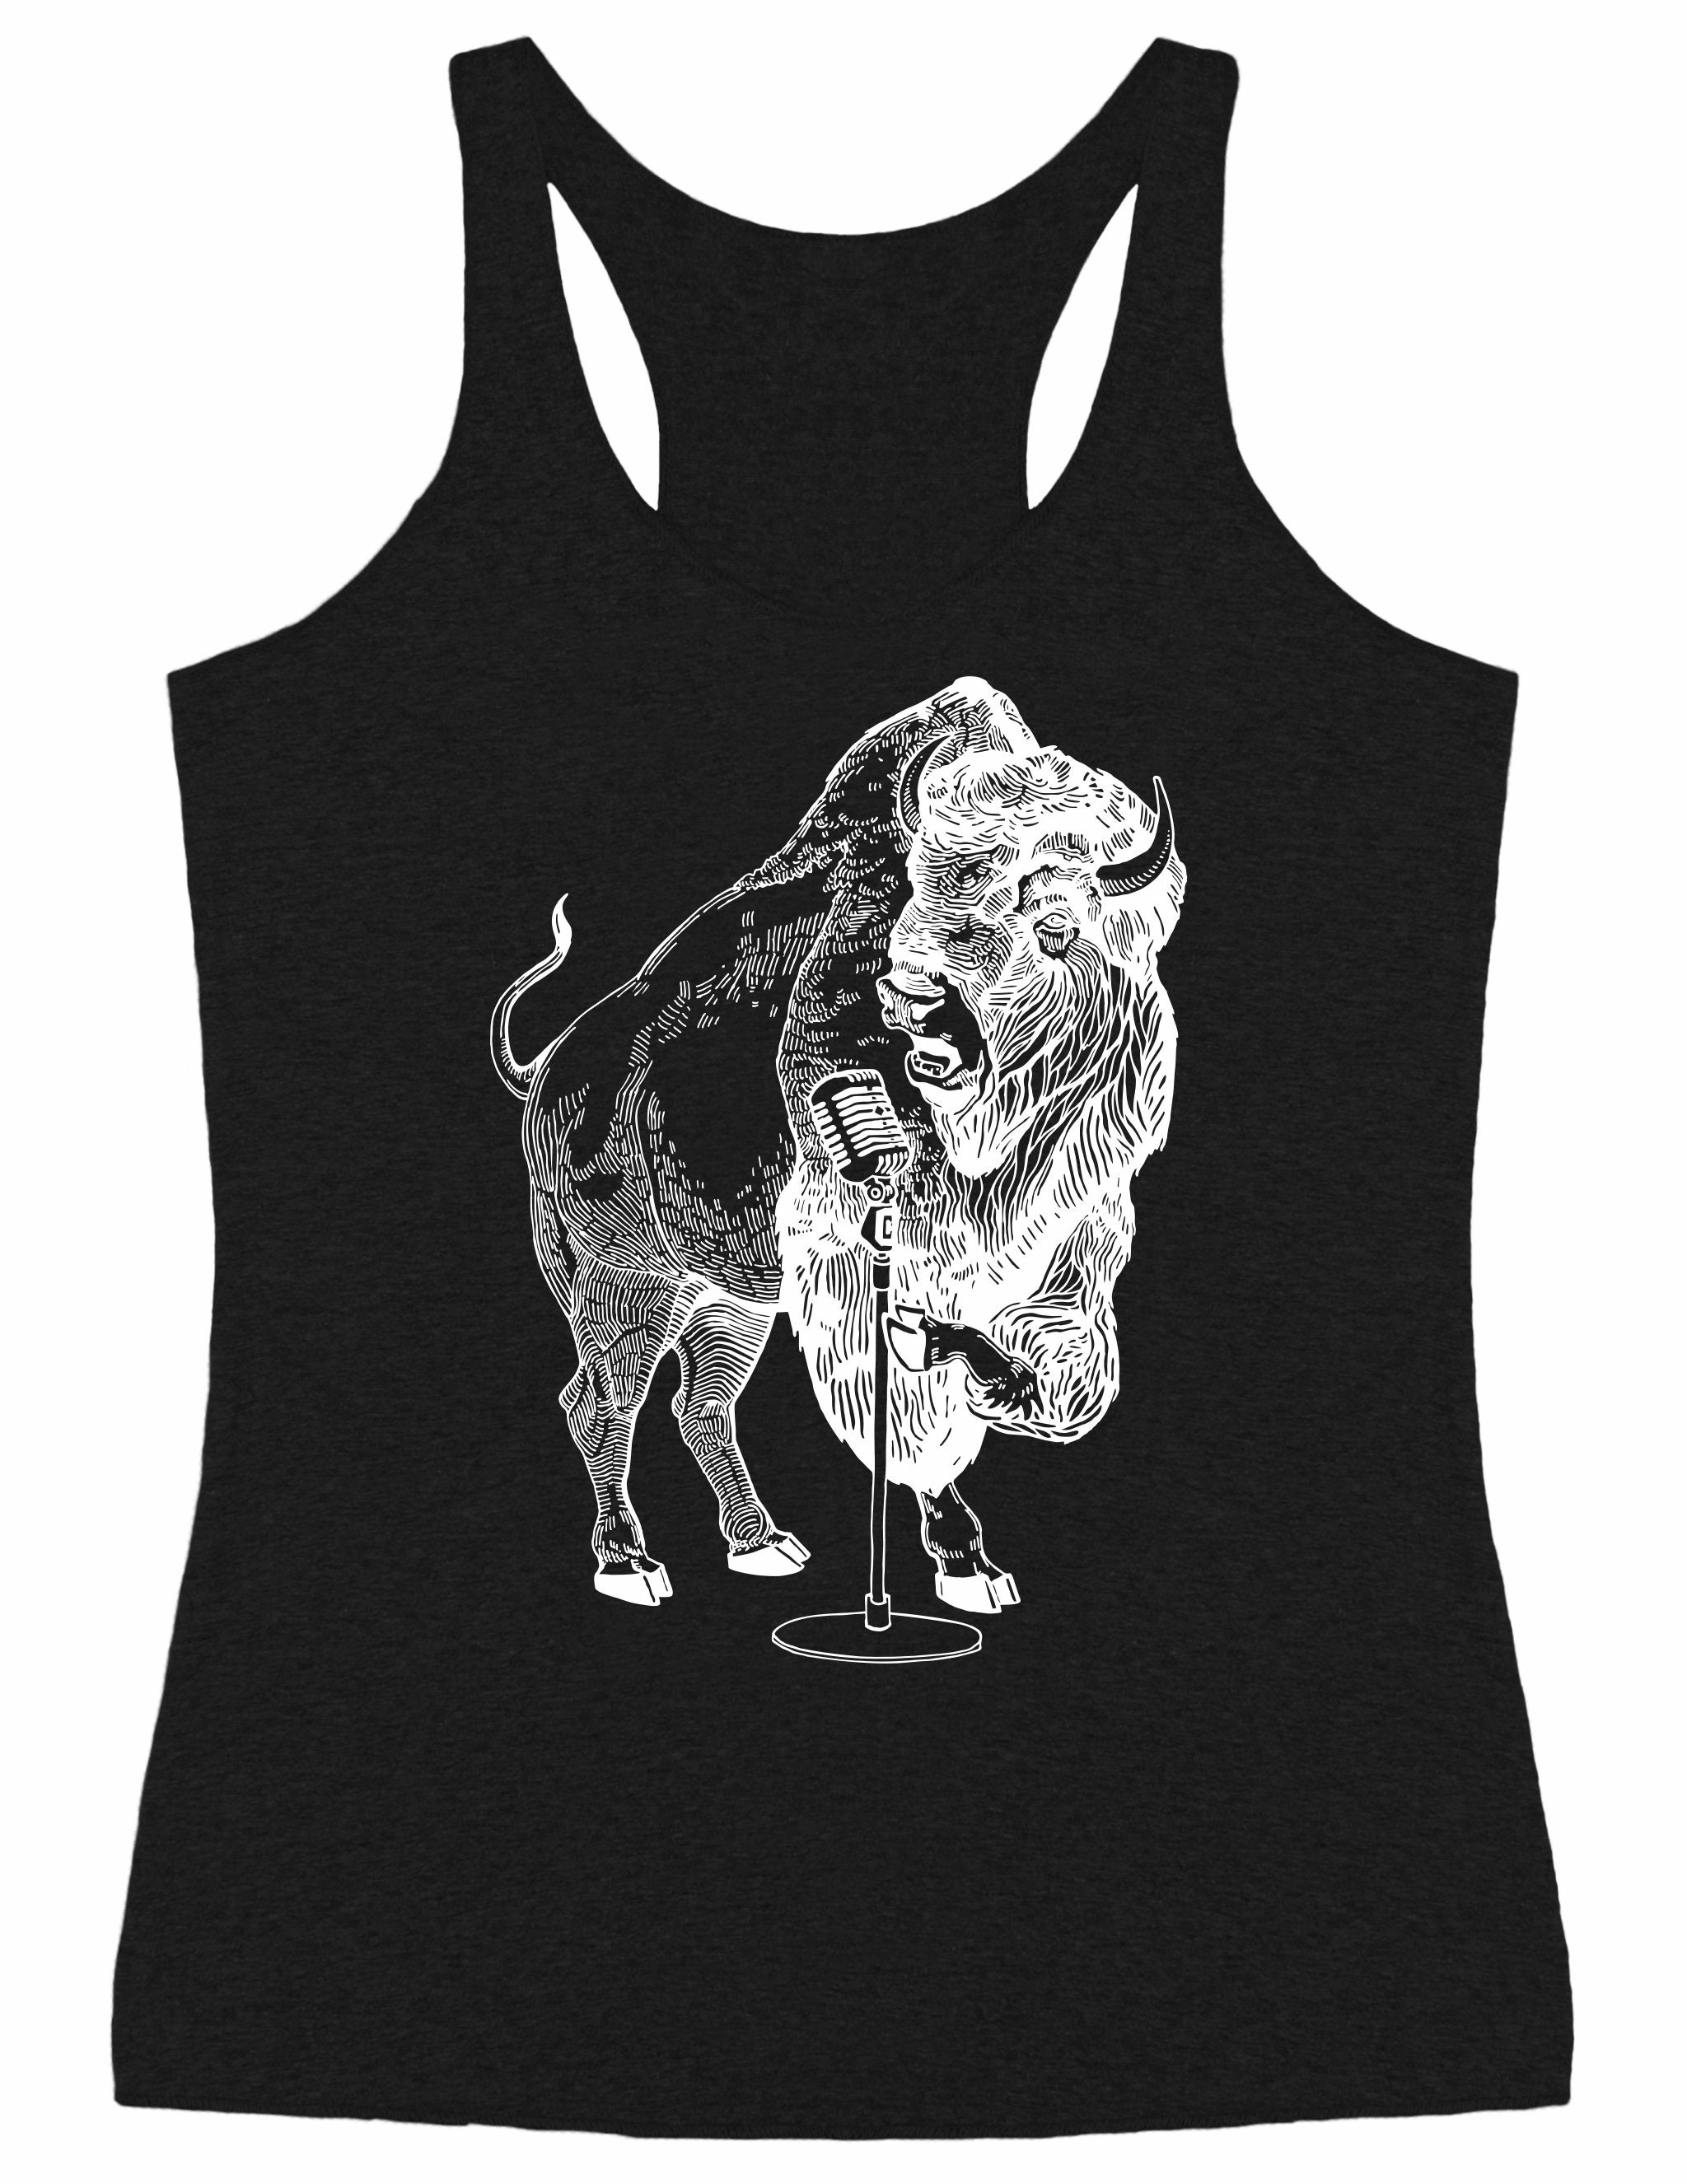 Bison Trying To Sing Women's Tri-Blend Tank Top Gift For Her, Girlfriend Birthday, Musician Wife Gift, Gifts Mom Seembo